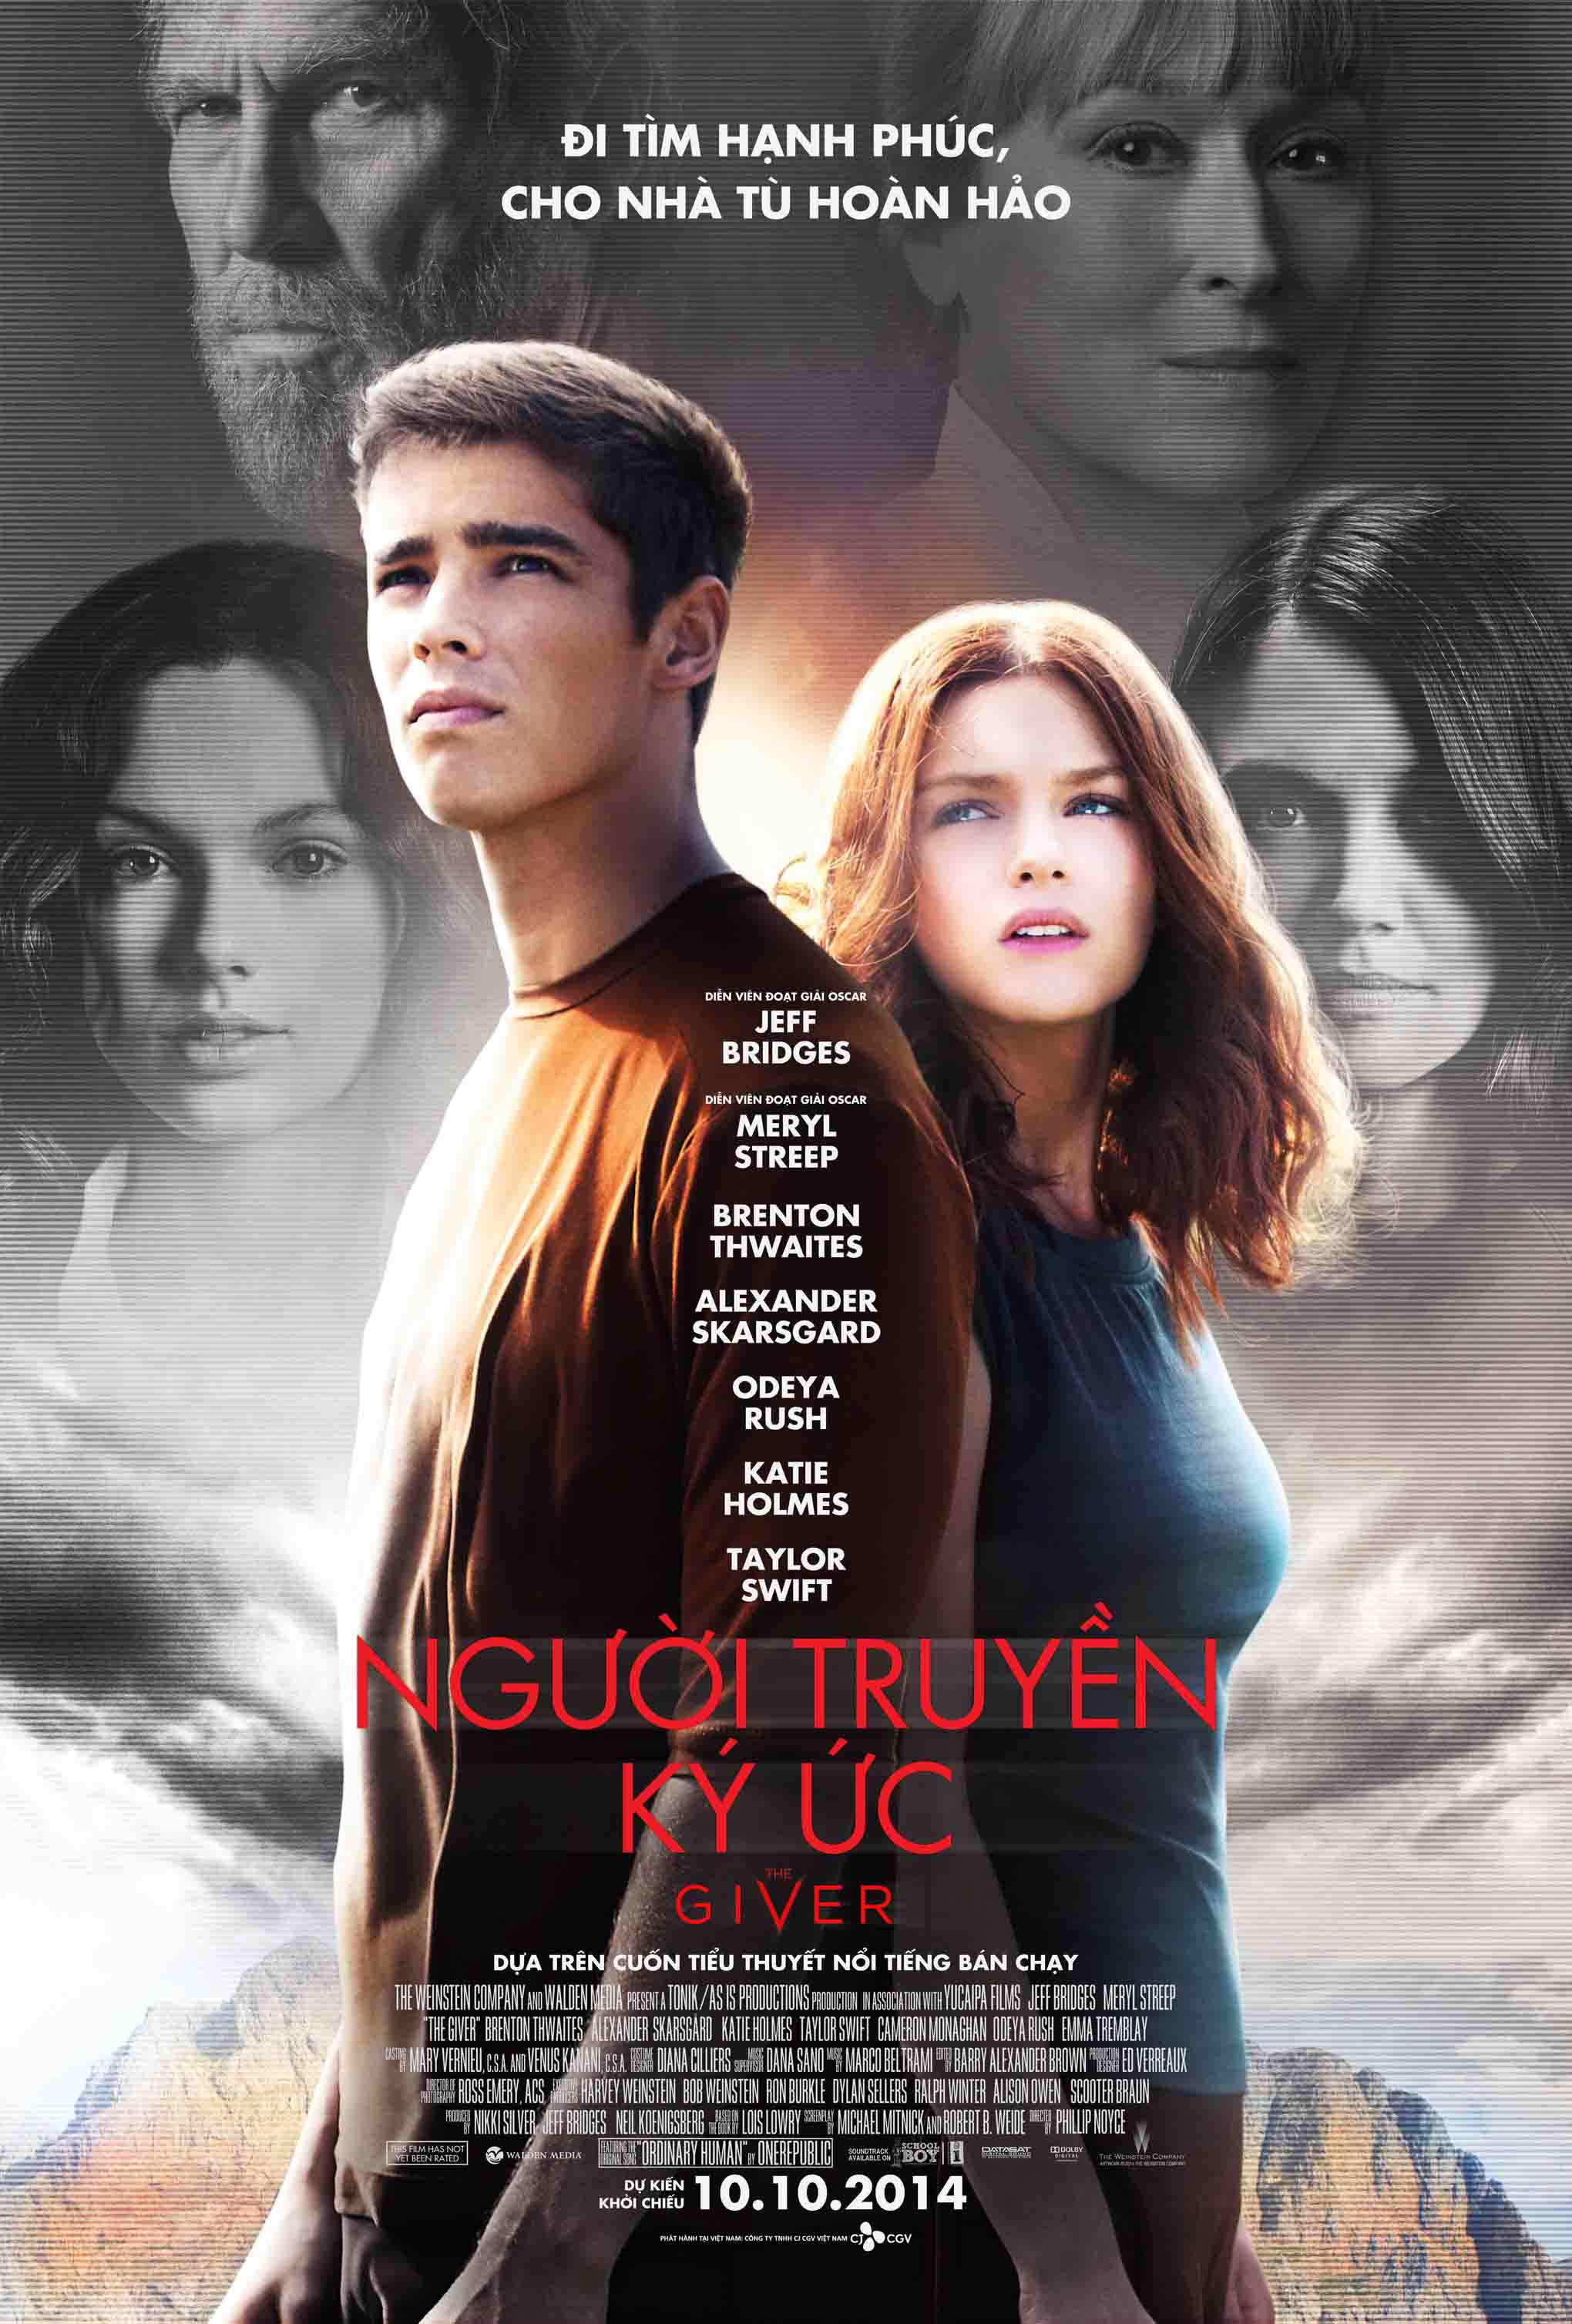 The Giver - 10 Oct.jpg